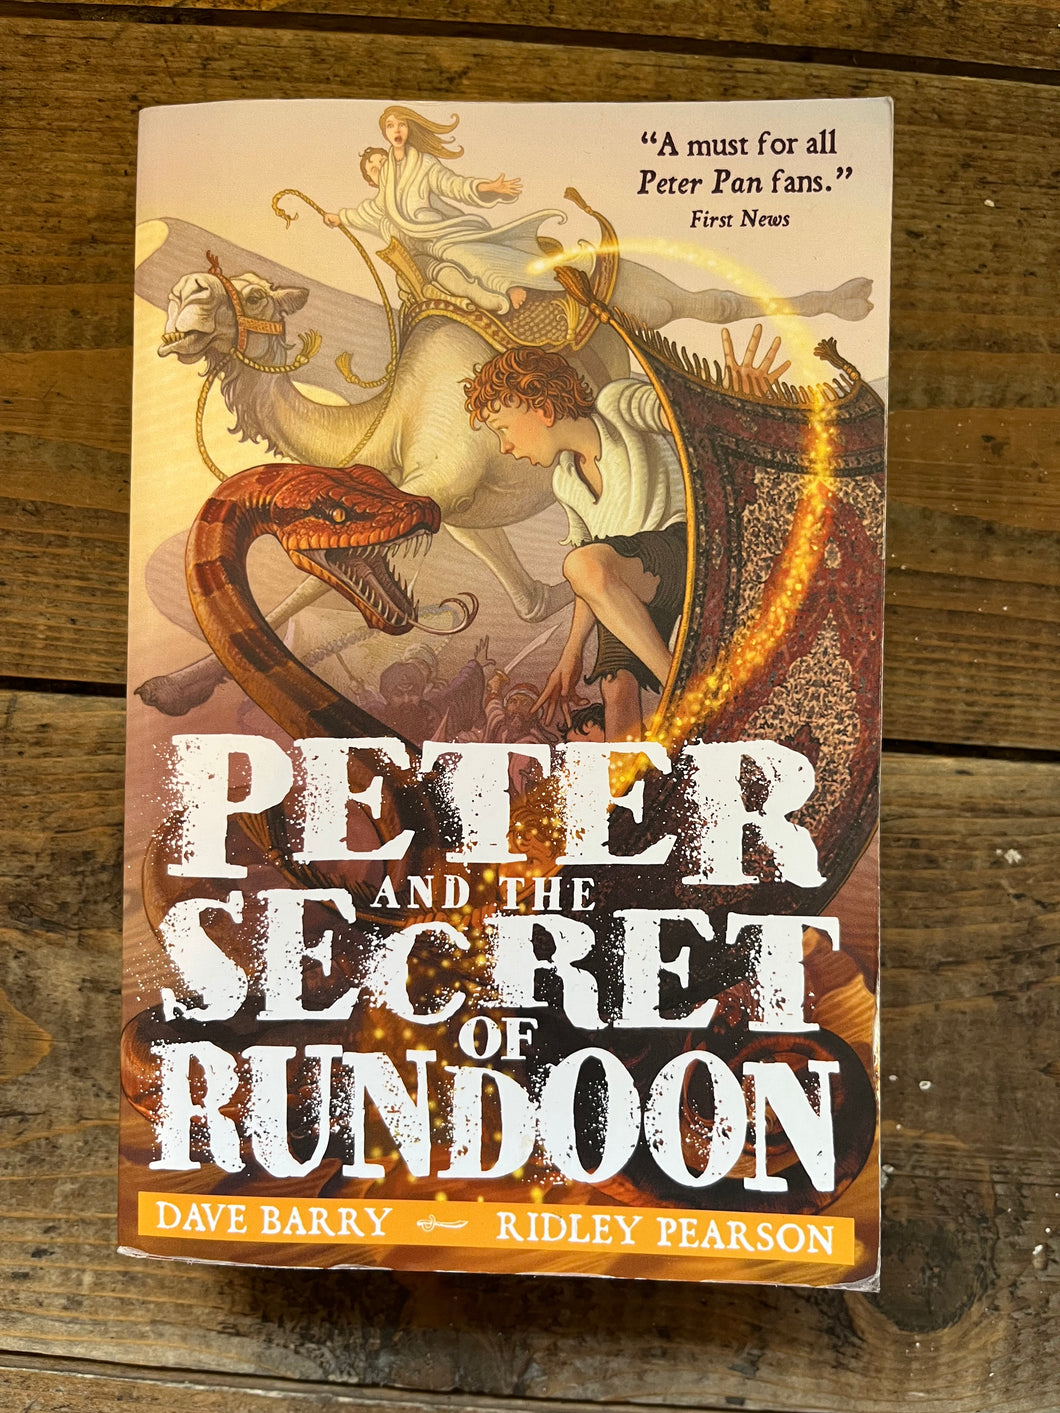 Peter and the Secret of Rundoon by Dave Barry and Ridley Pearson